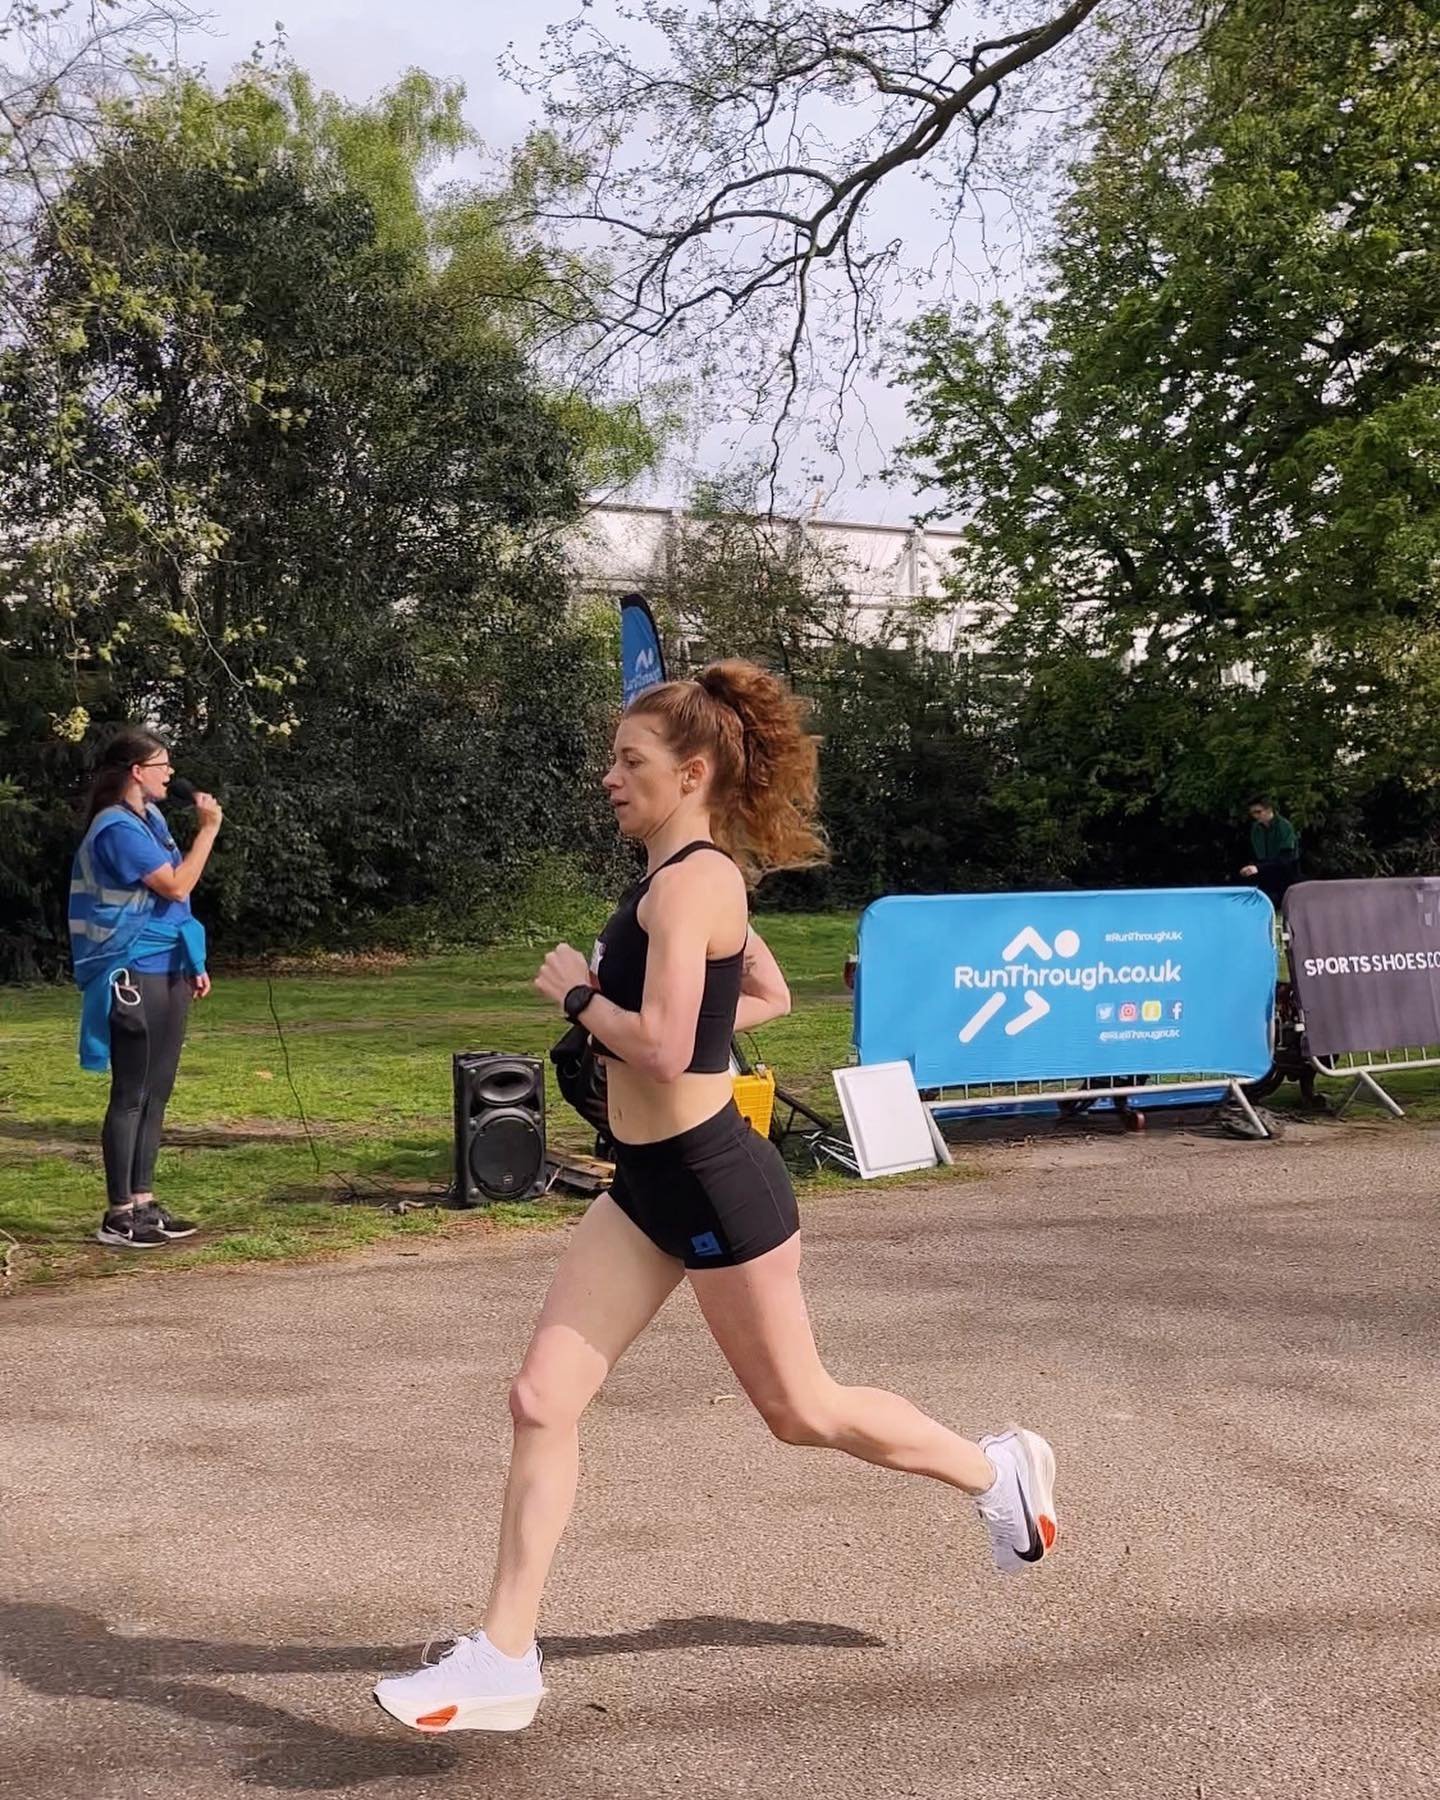 Weekend 🎞️

An overnight stay near Battersea Park as Ben was racing the @fridaynights5k (but it was a 10k this time) and I had the @runthroughuk 5k the next morning 🏃🏼&zwj;♀️

There was a @bunsfromhome on the road we stayed at, so we couldn&rsquo;